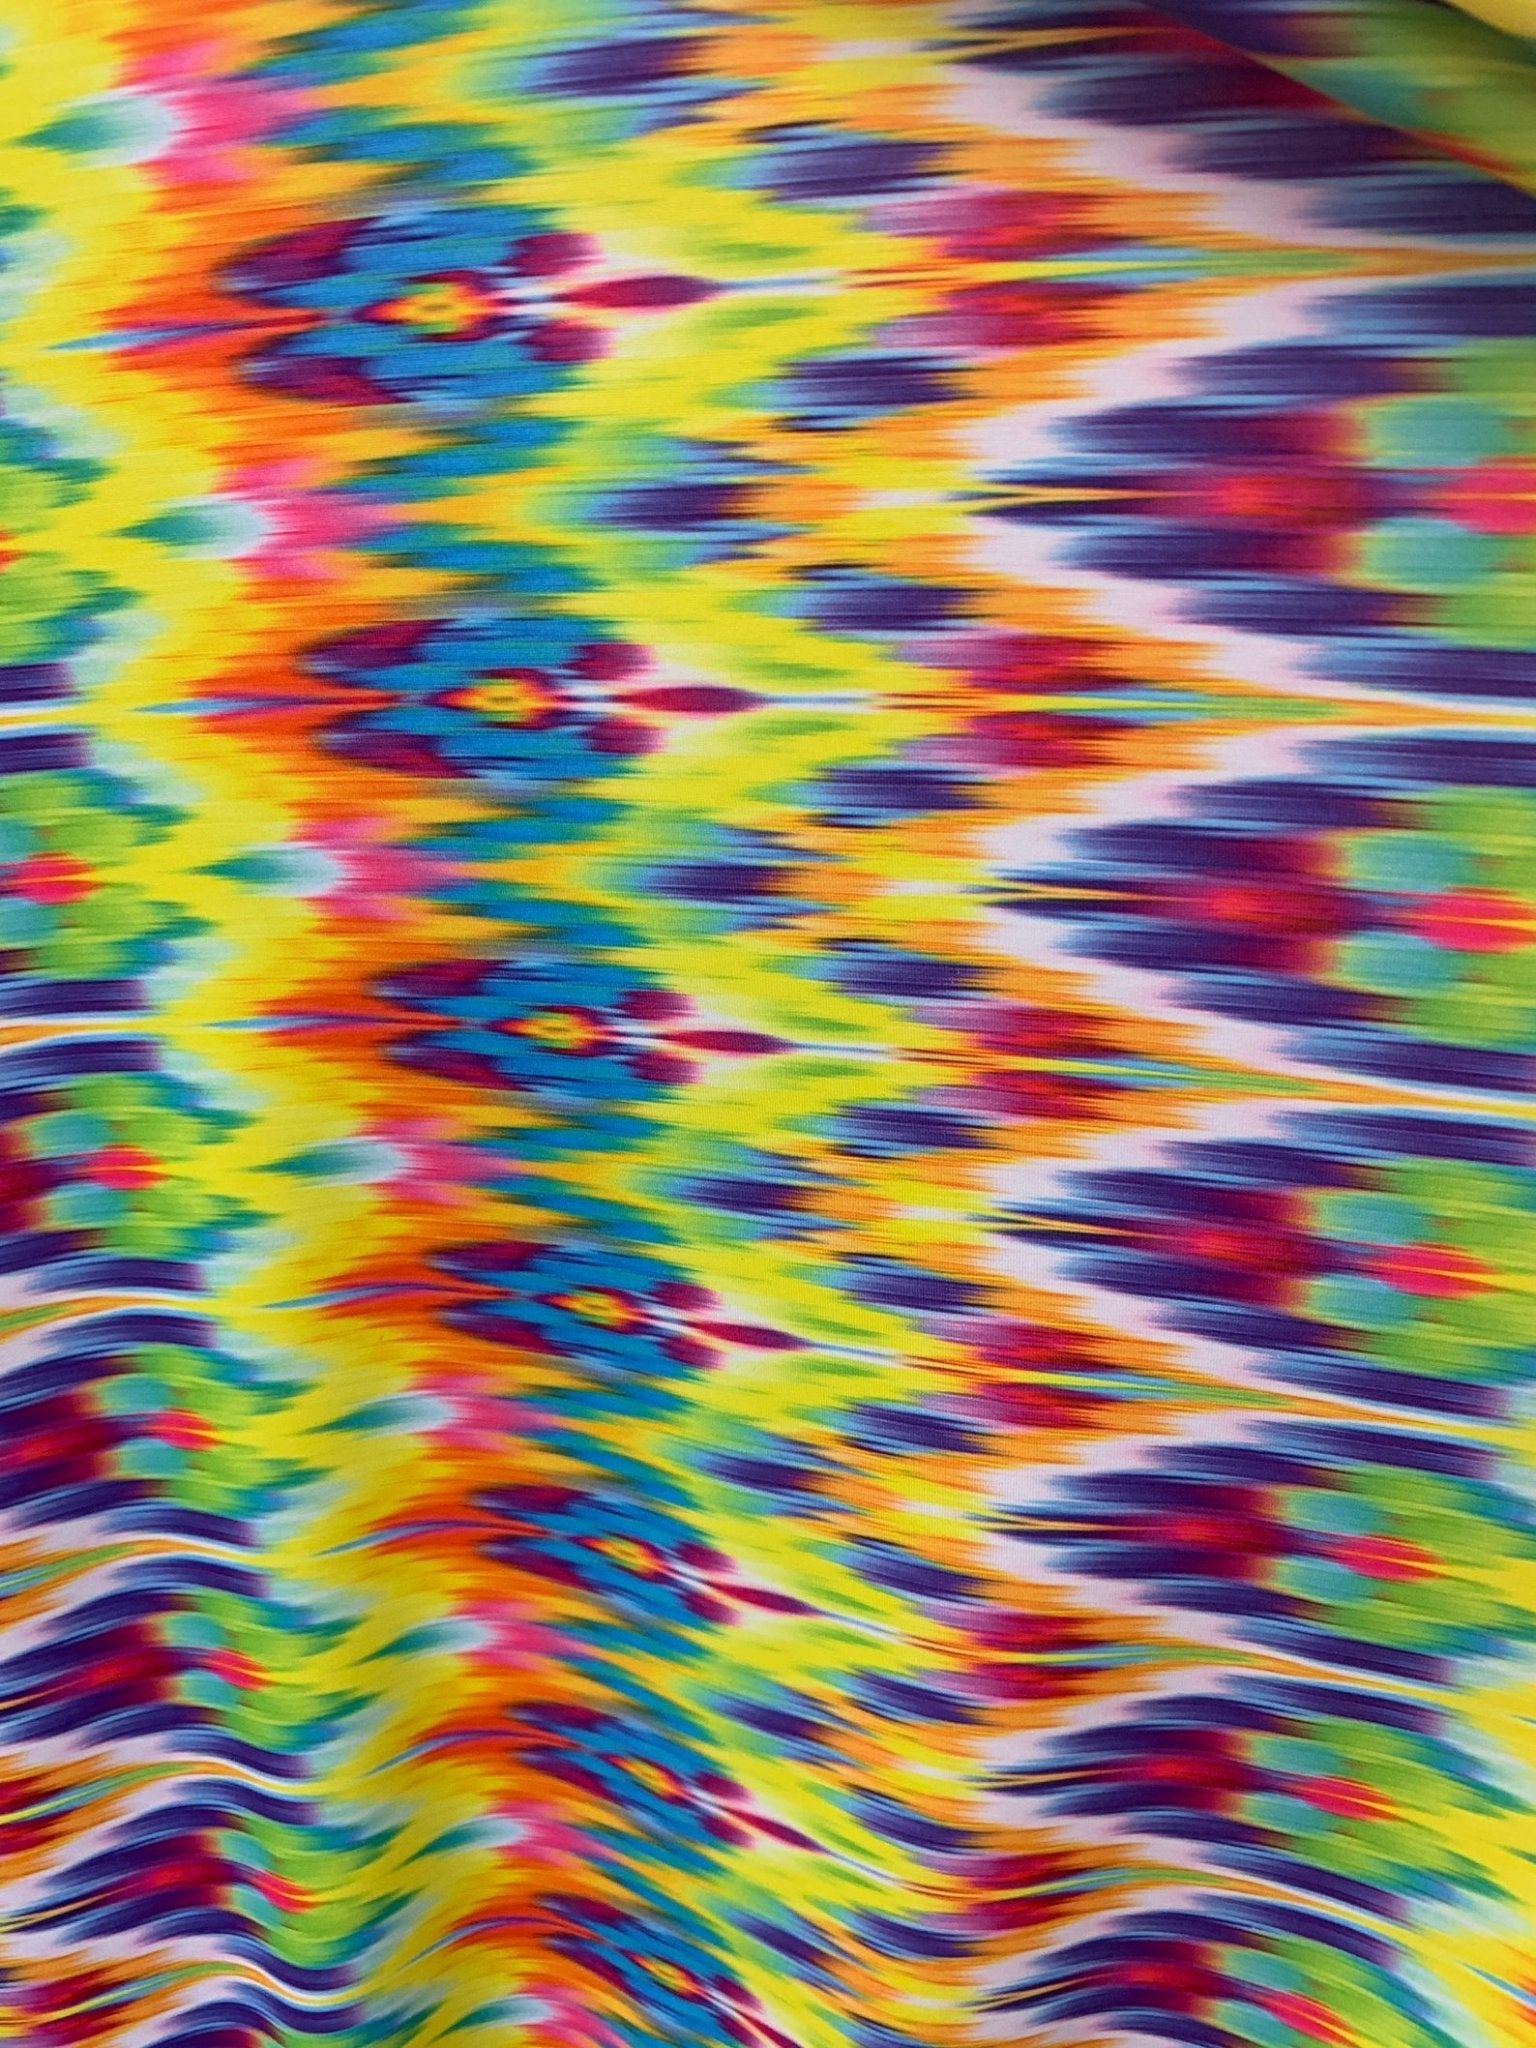 Poly Spandex Tie Dye Abstract Swimsuit Print Fabric By The YardSpandex FabricICEFABRICICE FABRICSPoly Spandex Tie Dye Abstract Swimsuit Print Fabric By The Yard ICEFABRIC